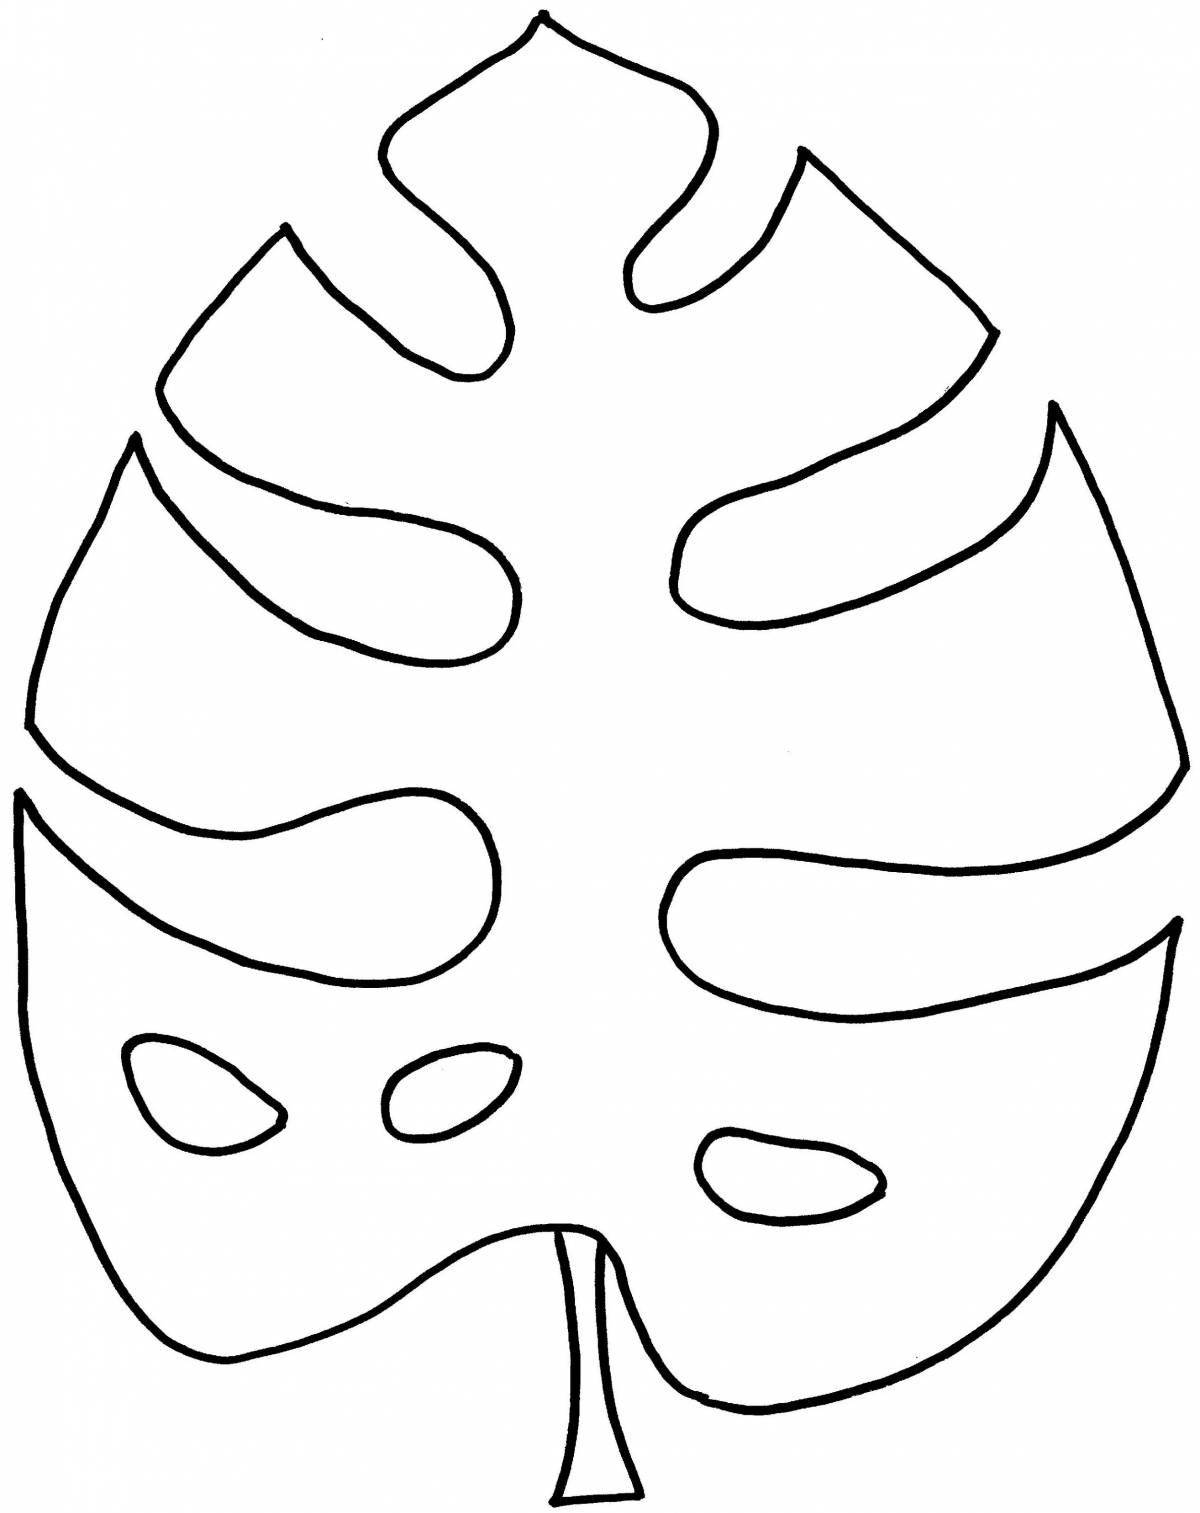 Color monstera leaf coloring page